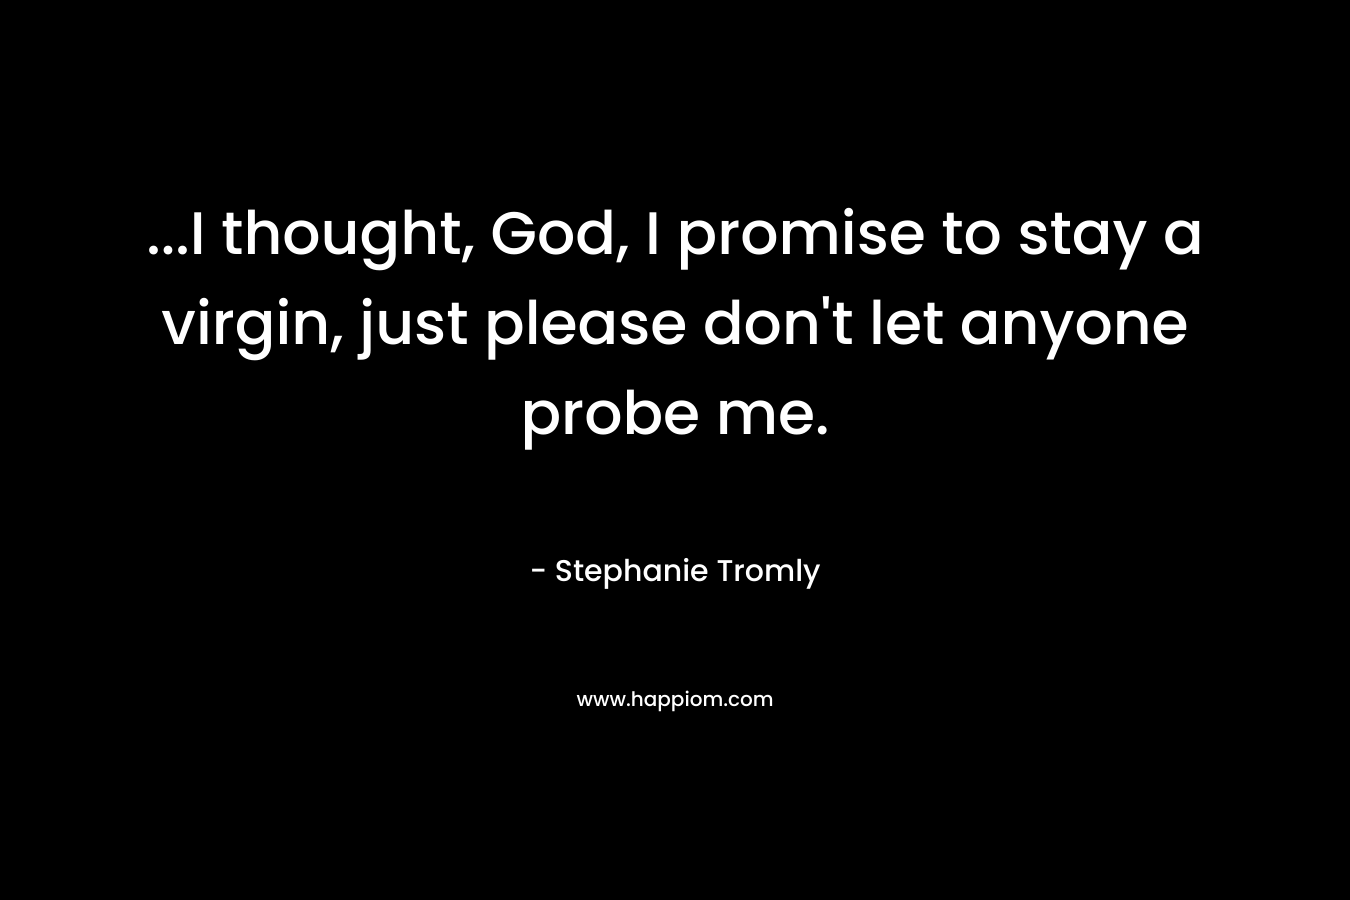 ...I thought, God, I promise to stay a virgin, just please don't let anyone probe me.